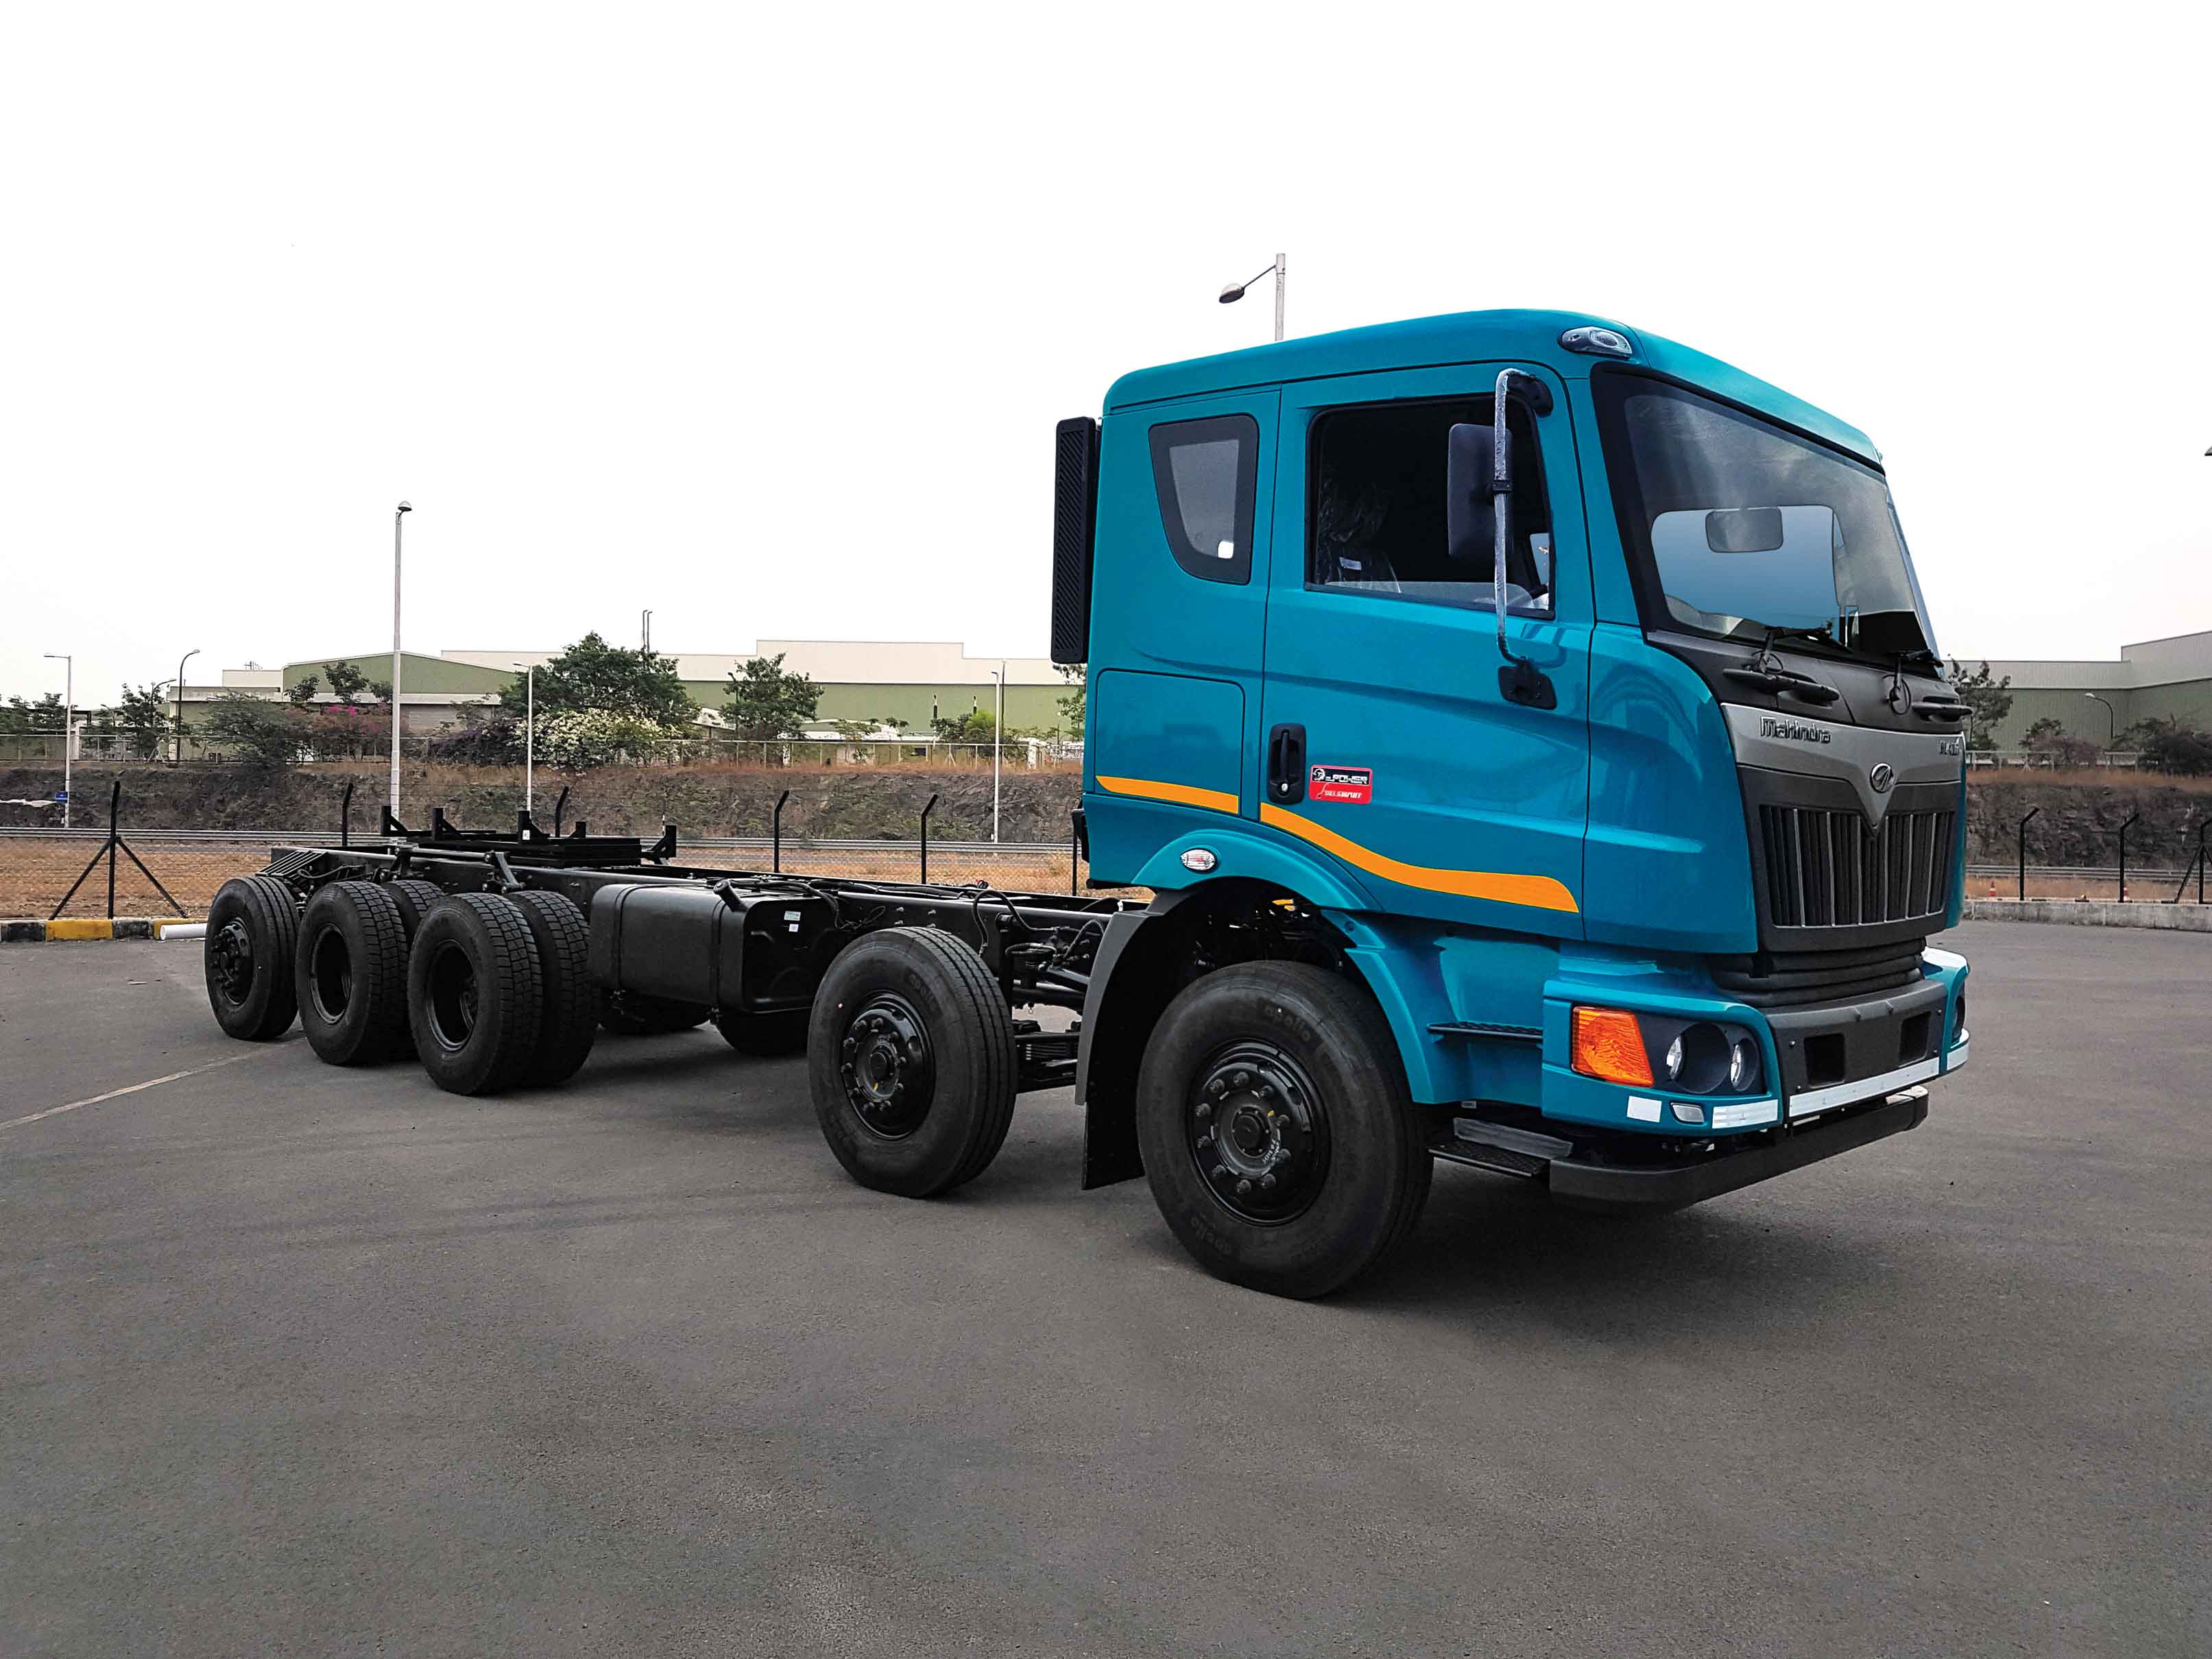 Mahindra introduces a set of industry first service offerings for its BLAZO HCV truck customers